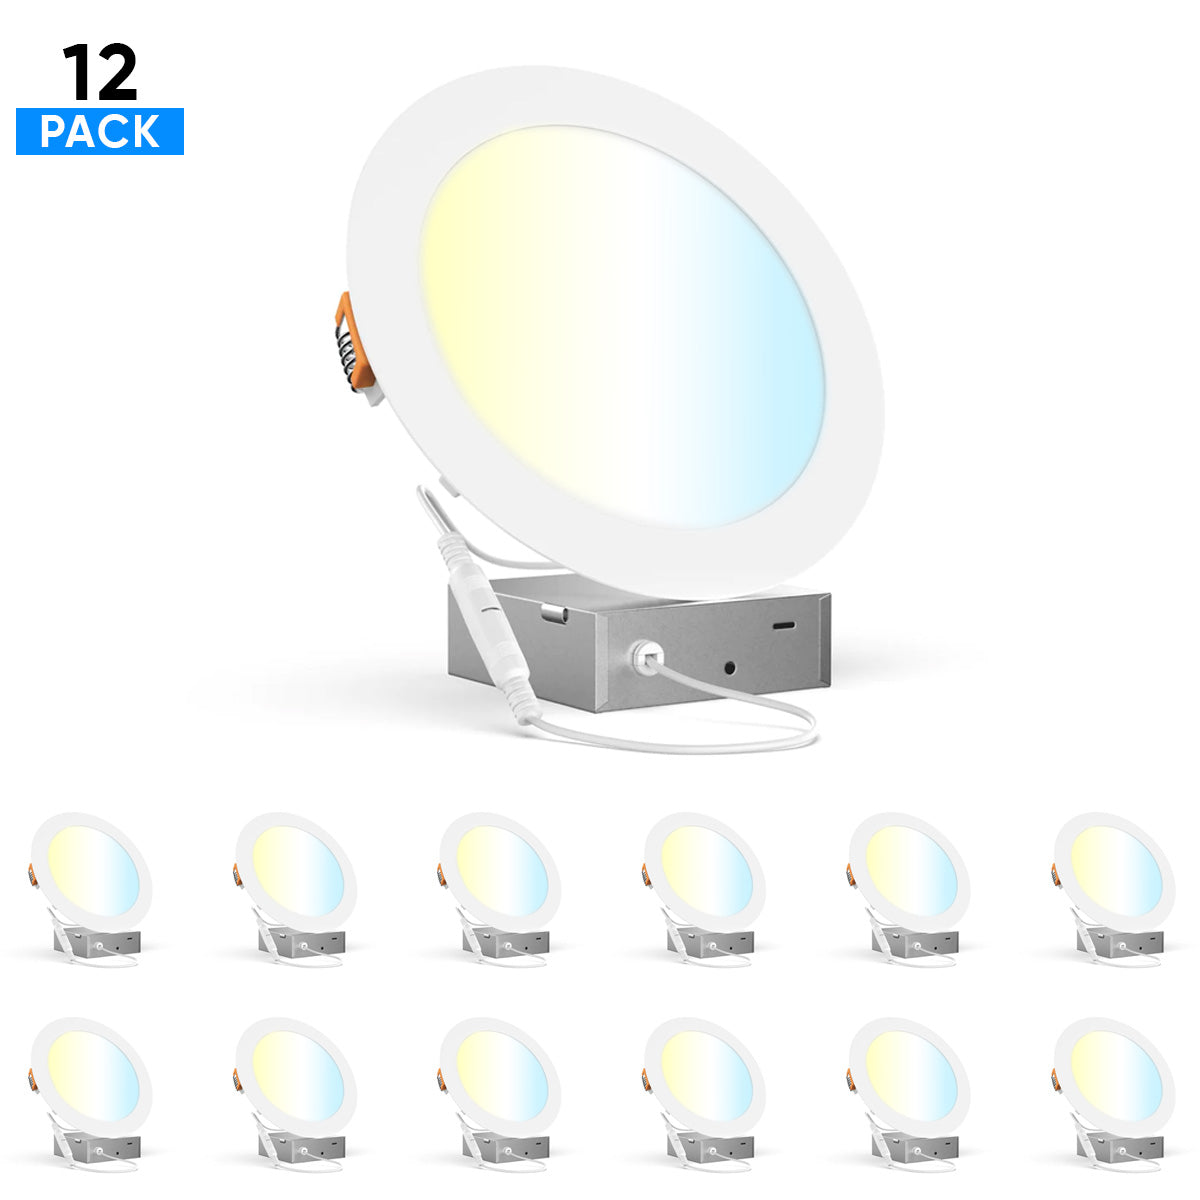 4" 9W LED Slim Panel Recessed Ceiling Light CCT Changeable 2700k 3000K 3500K 4000K 5000K, with Junction Box, Round